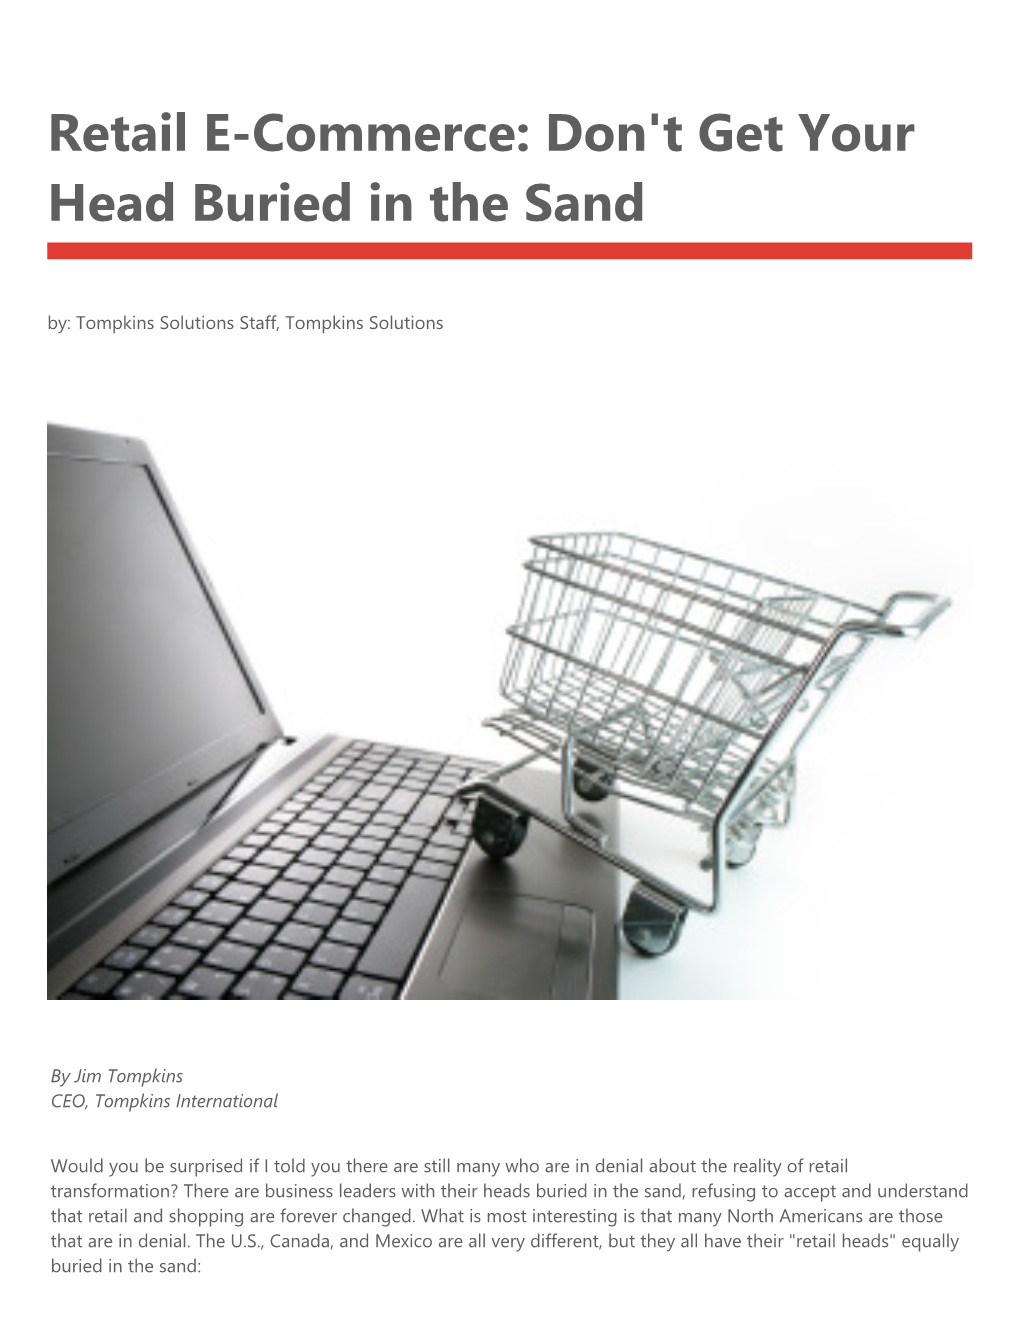 Retail E-Commerce: Don't Get Your Head Buried in the Sand